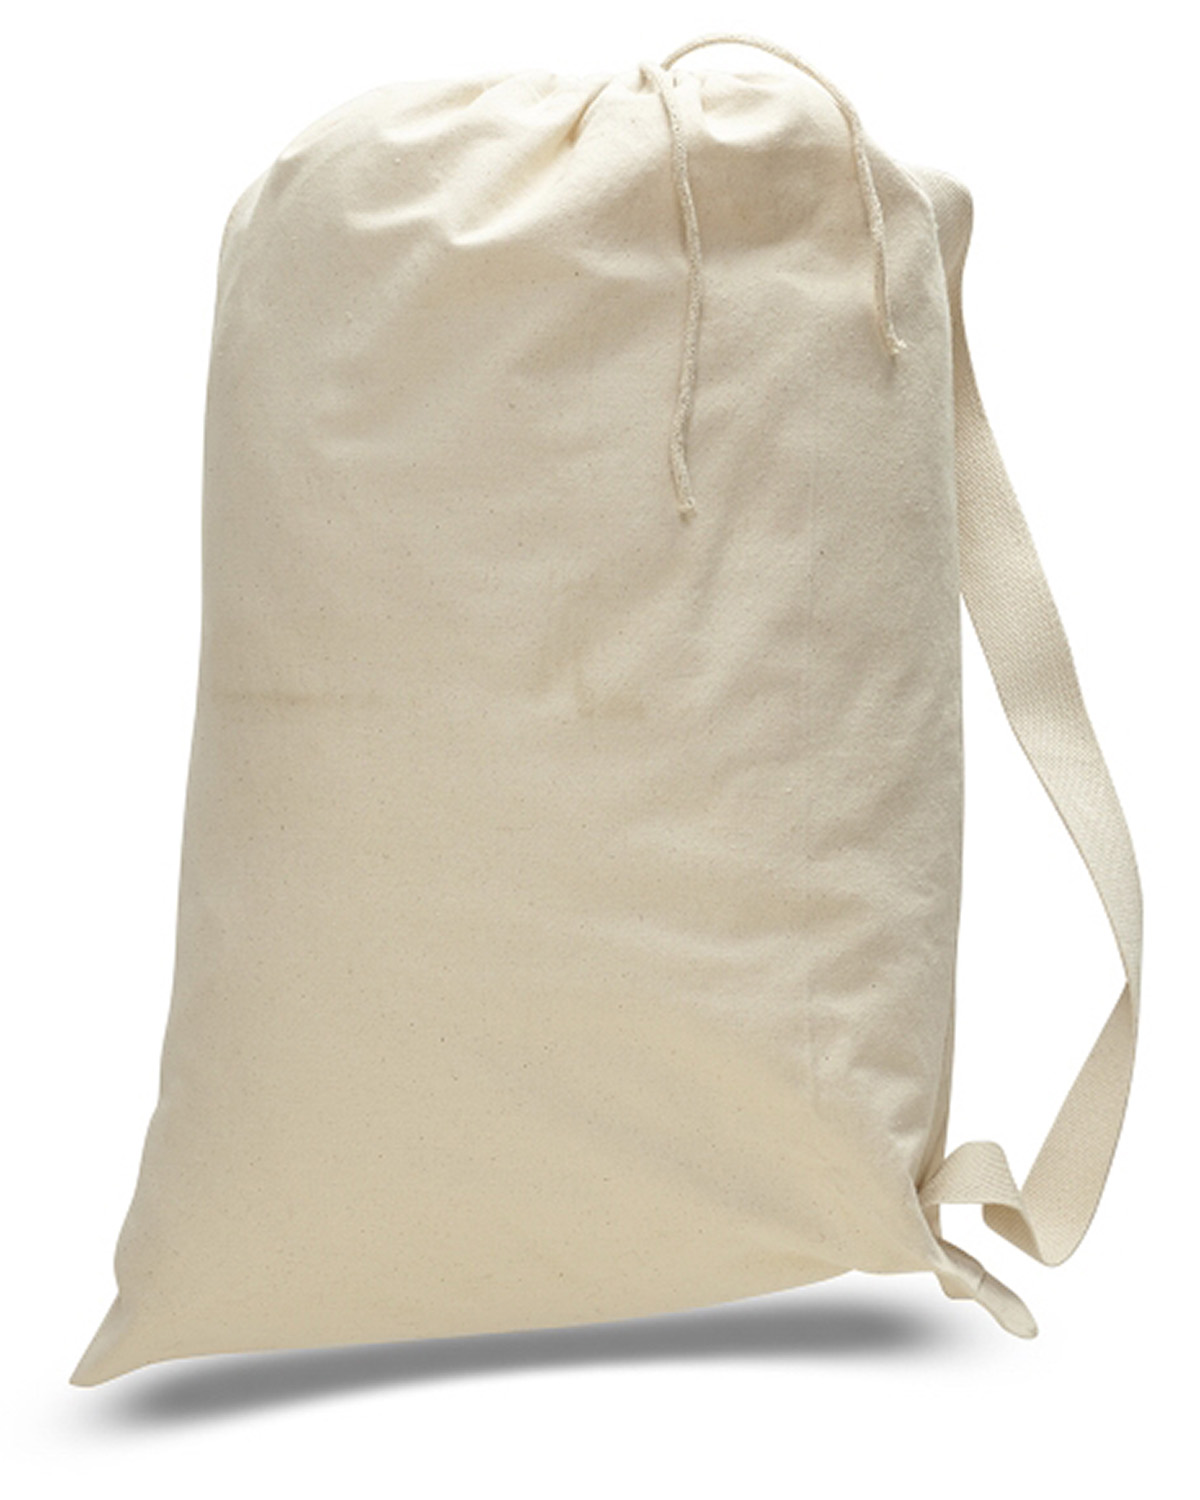 OAD Oad110 Large Laundry Bag - Natural - One Size